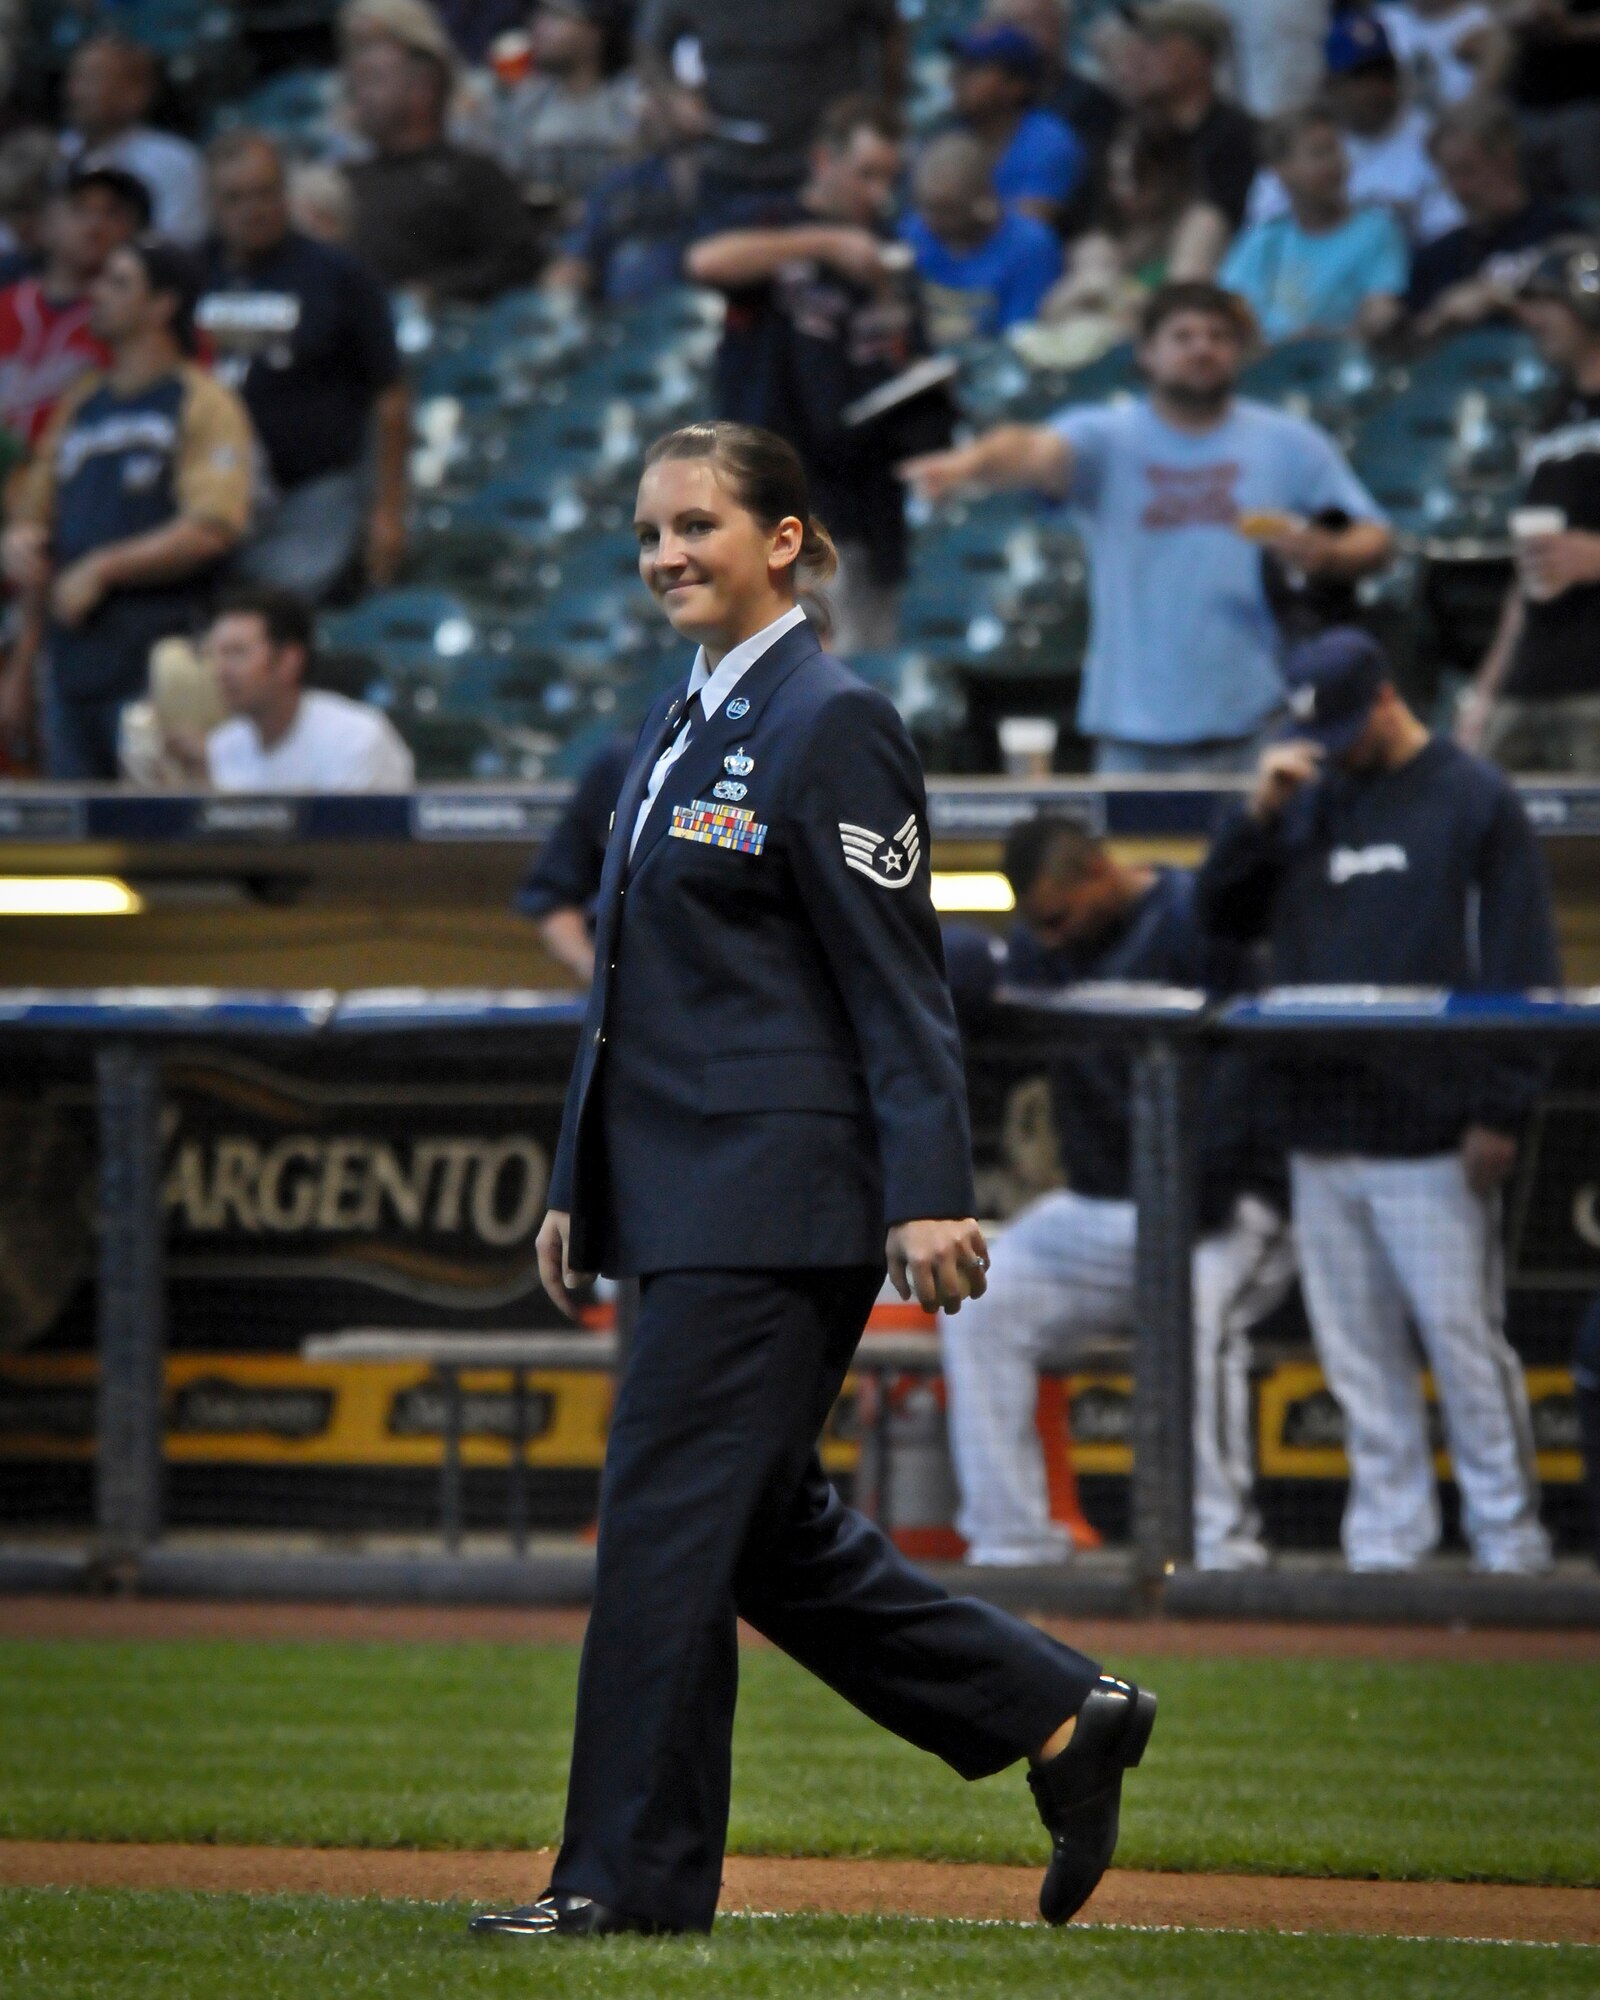 With ball in hand, Staff Sgt. Leah Rogers walks across the infield at Miller Park towards the pitcher’s mound Wed., Sept. 12, 2012. 
Rogers, of the 128th Air Refueling Wing in Milwaukee, was selected to throw out the ceremonial first pitch before the Brewers’ game against the Atlanta Braves. (Air National Guard Photo by 2nd Lt. Nathan Wallin / Released)
